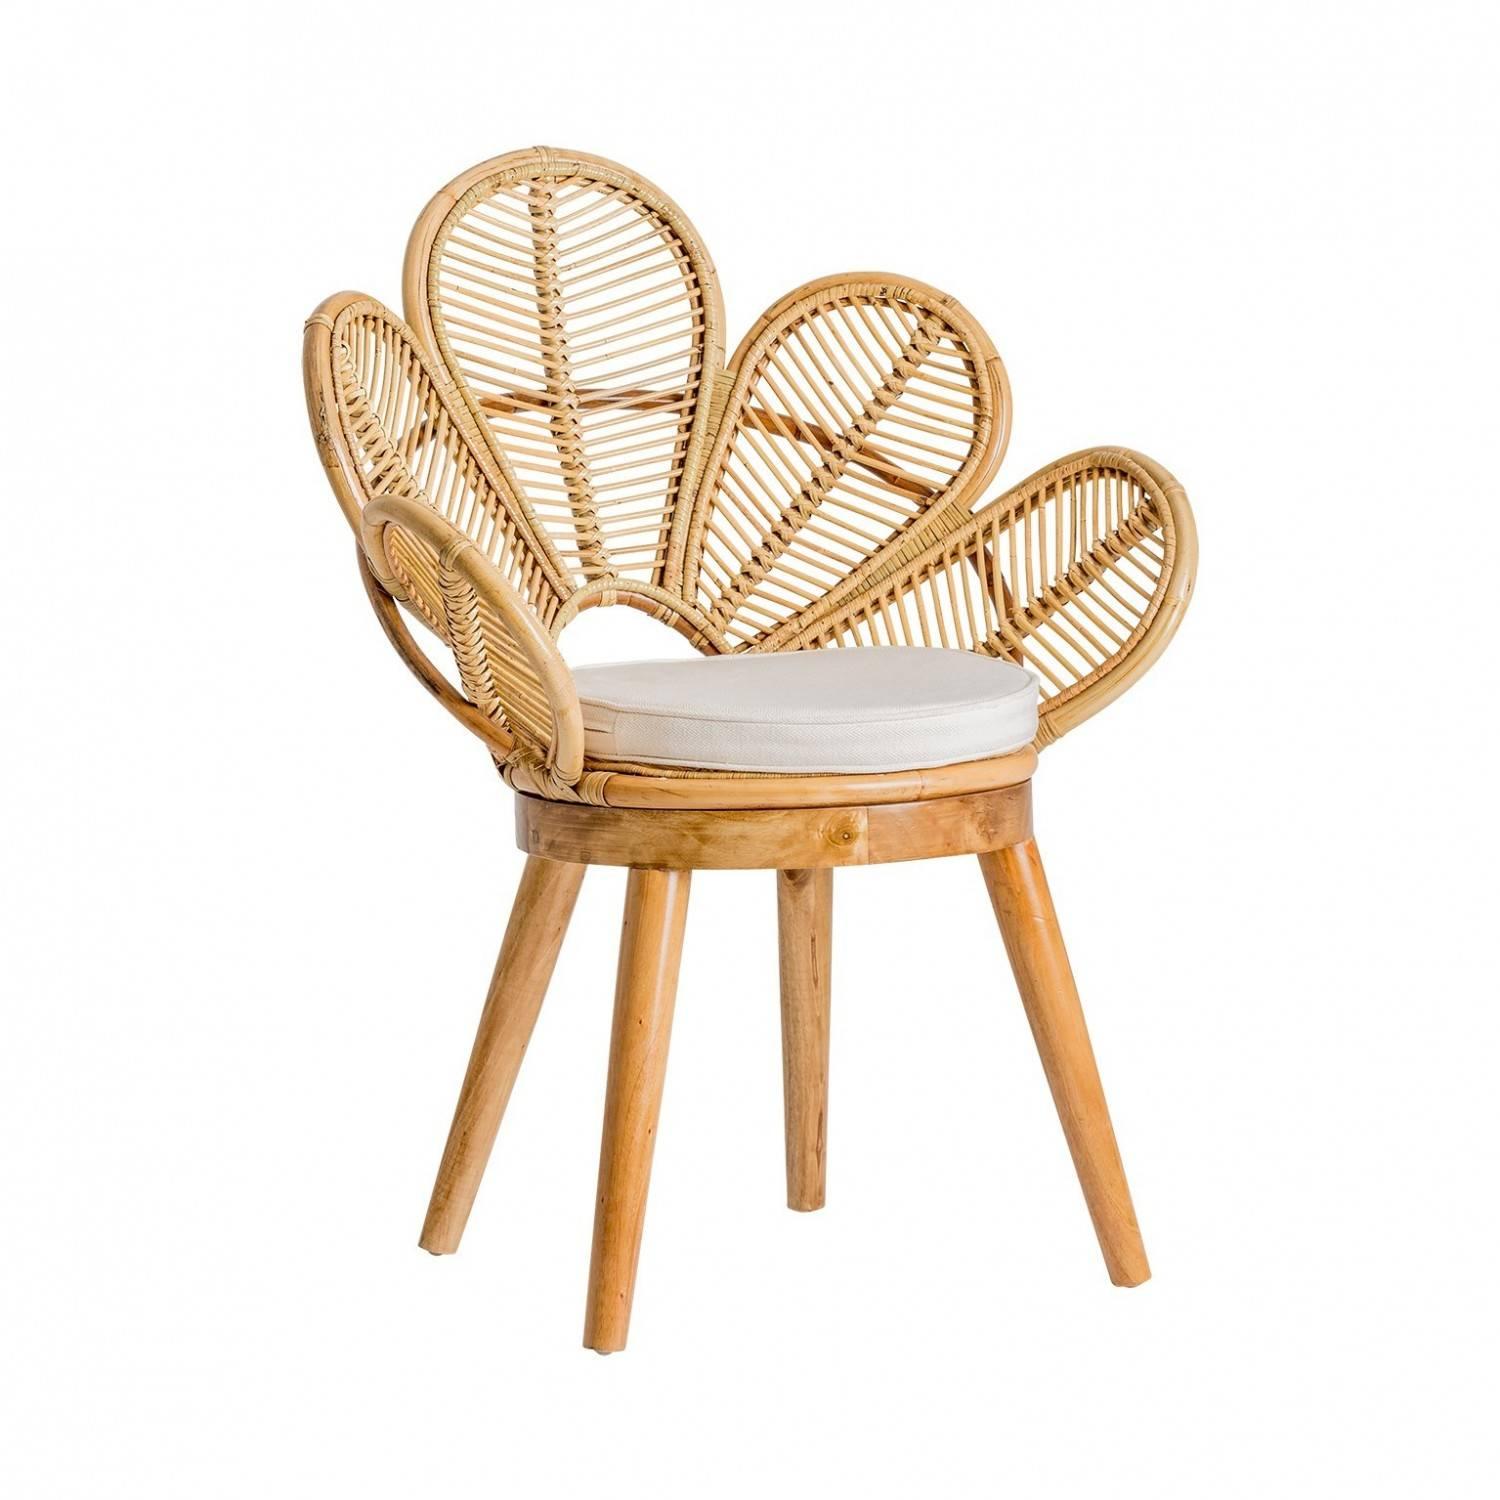 Set of six rattan and wooden flower chairs: flower petal shaped seats, on wooden feets. They will be perfect on your terrace, in your veranda, your winter garden, around the dining table. Poetic, elegant and aerial. All in excellent state (never